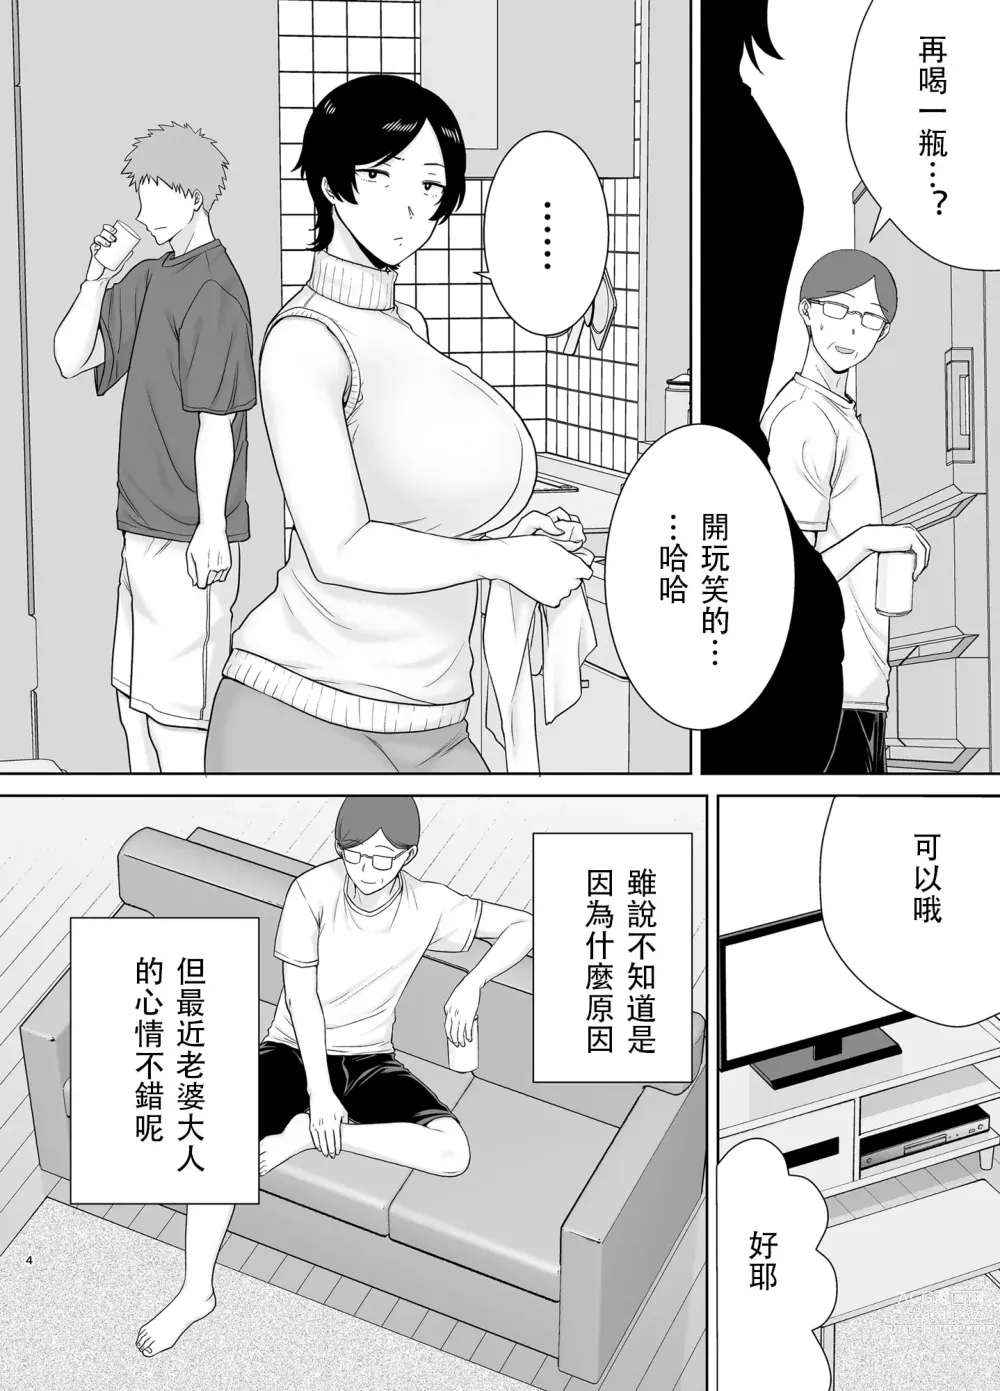 Page 3 of doujinshi 母さんだって女なんだよ！2